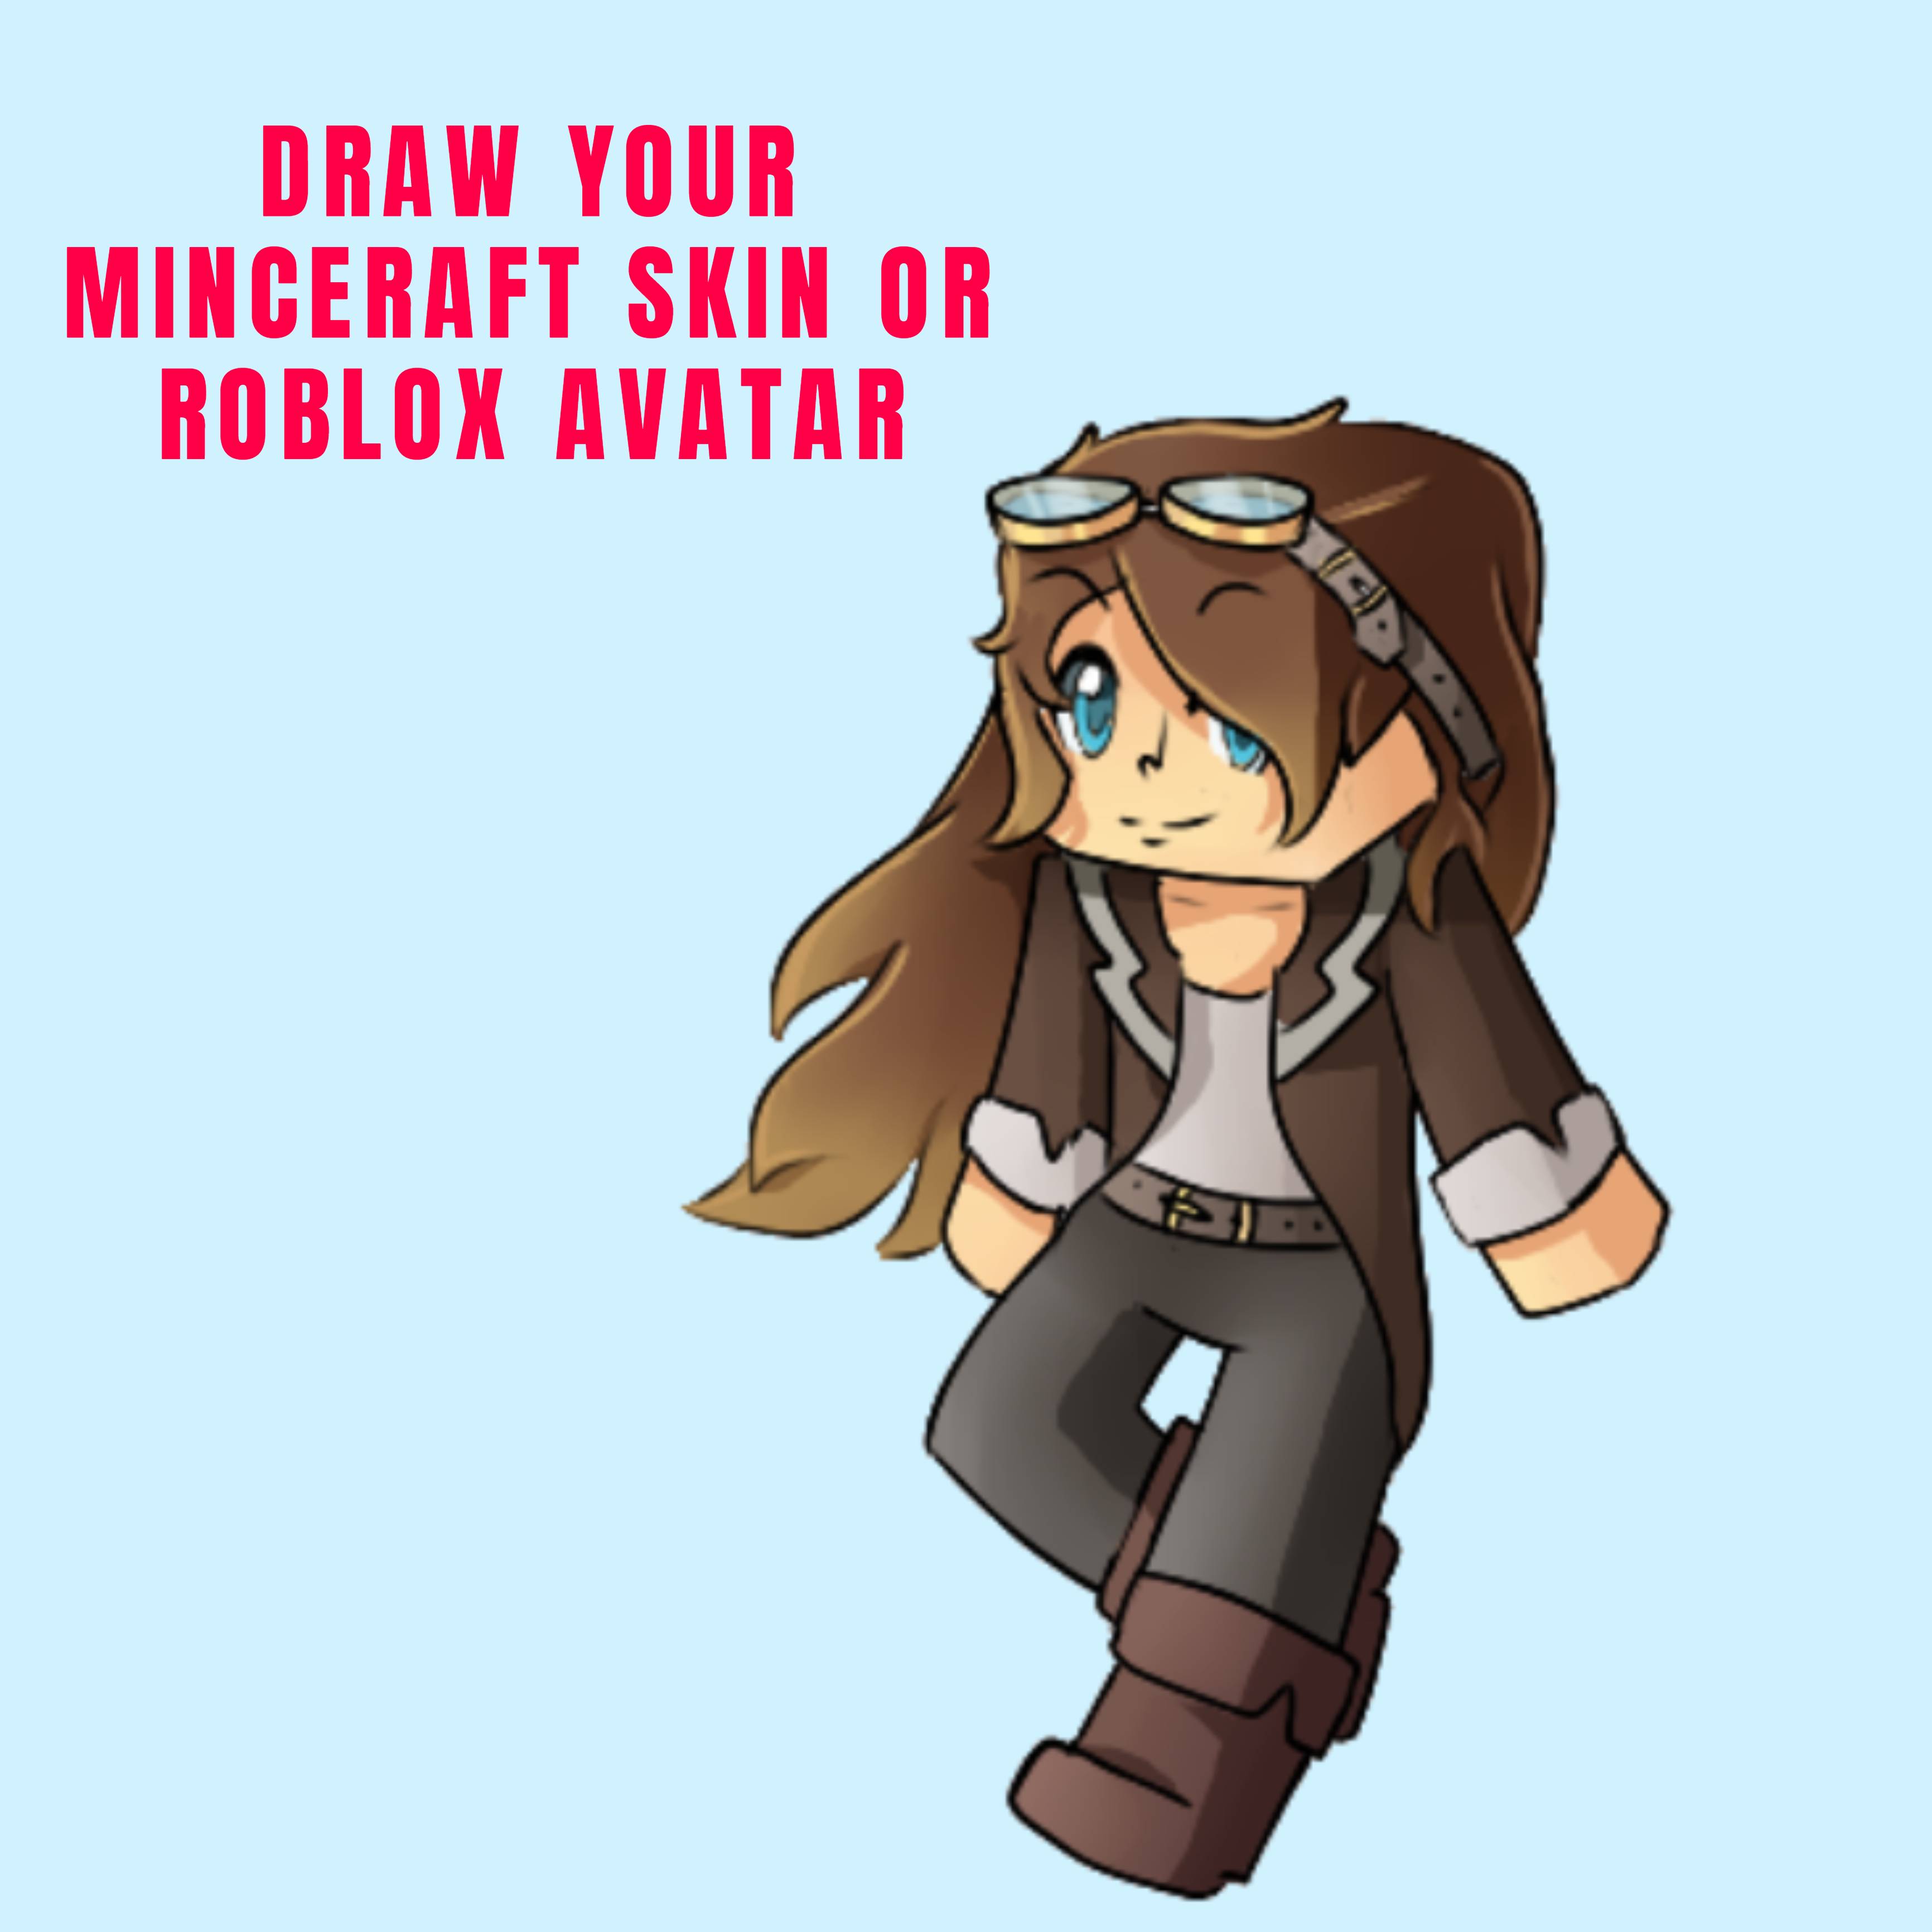 Draw Your Minecraft Skin Or Roblox Avatar By Asmae Daoud - found someone wearing this mildly nsfw roblox